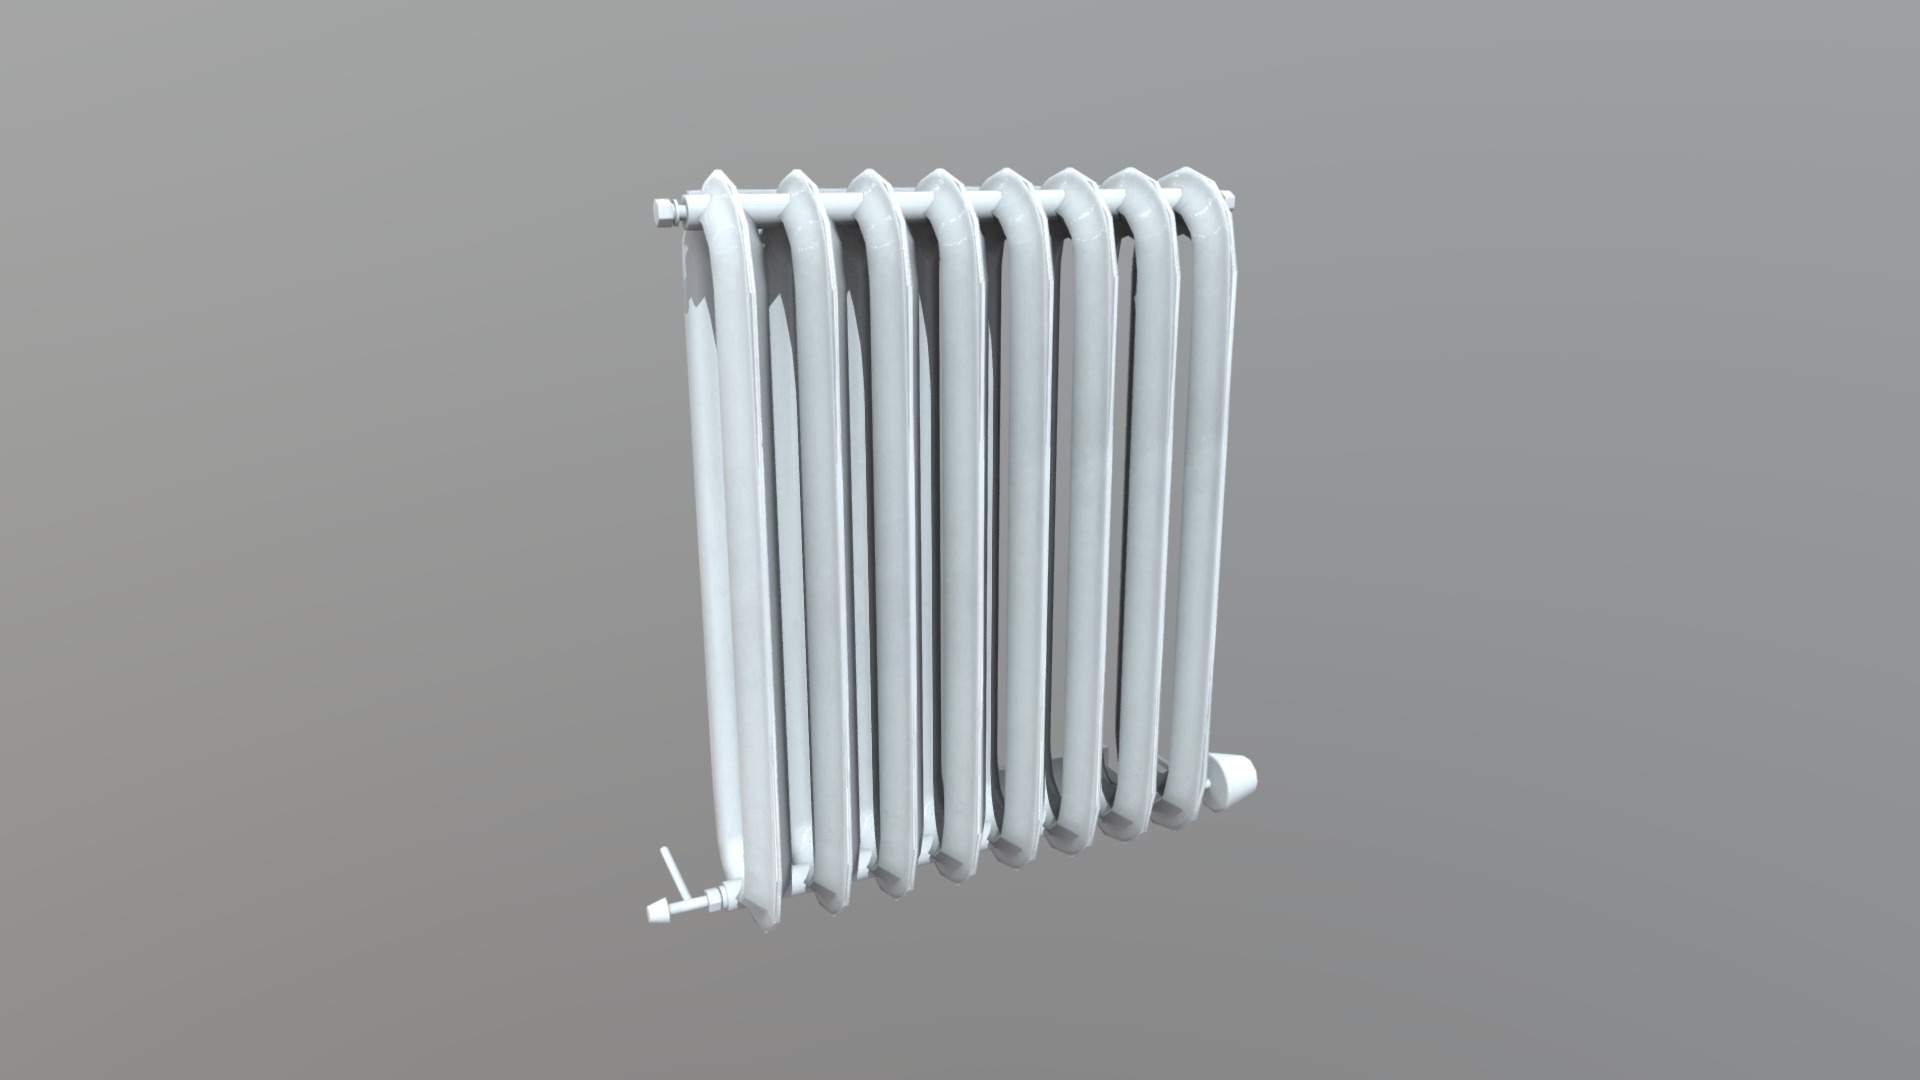 3D model Radiator - This is a 3D model of the Radiator. The 3D model is about a white toothbrush on a grey background.